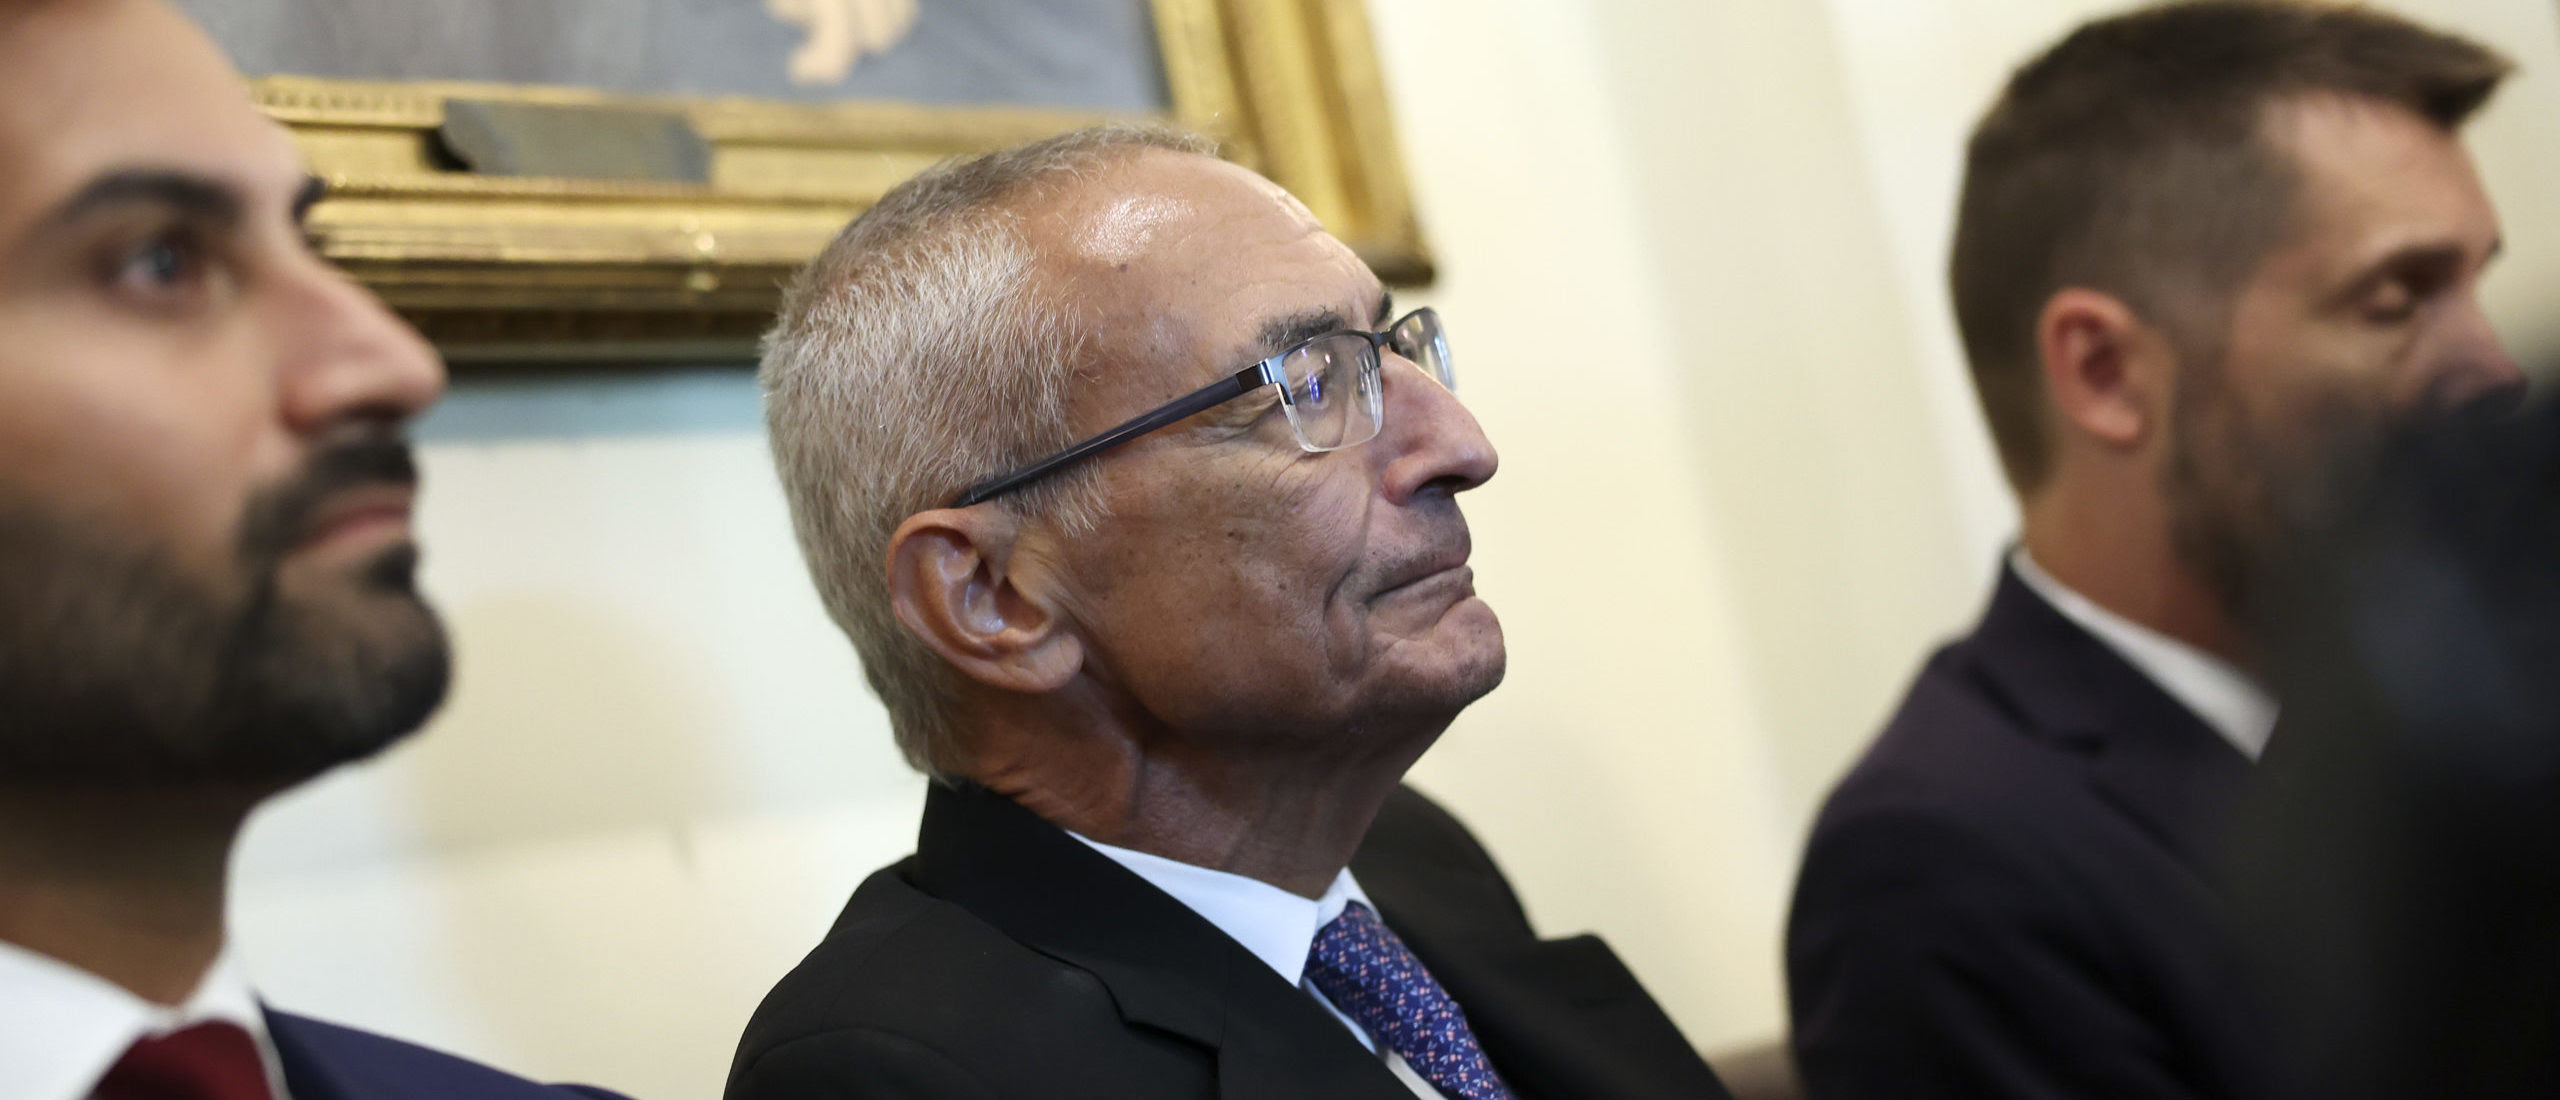 STEVE PAVLICK: John Podesta Is Back In The White House. Here’s Why You Should Worry